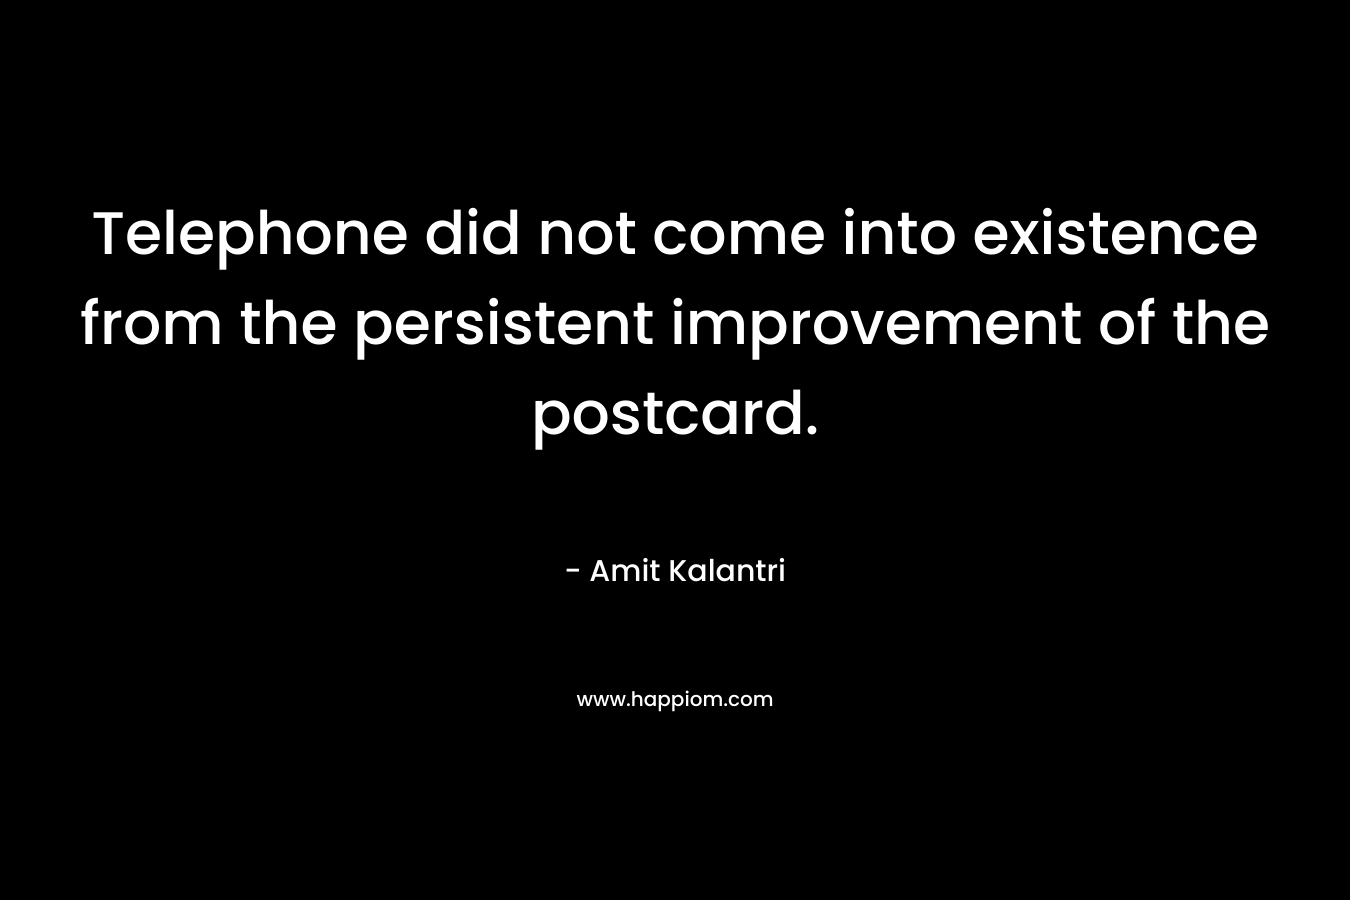 Telephone did not come into existence from the persistent improvement of the postcard. – Amit Kalantri